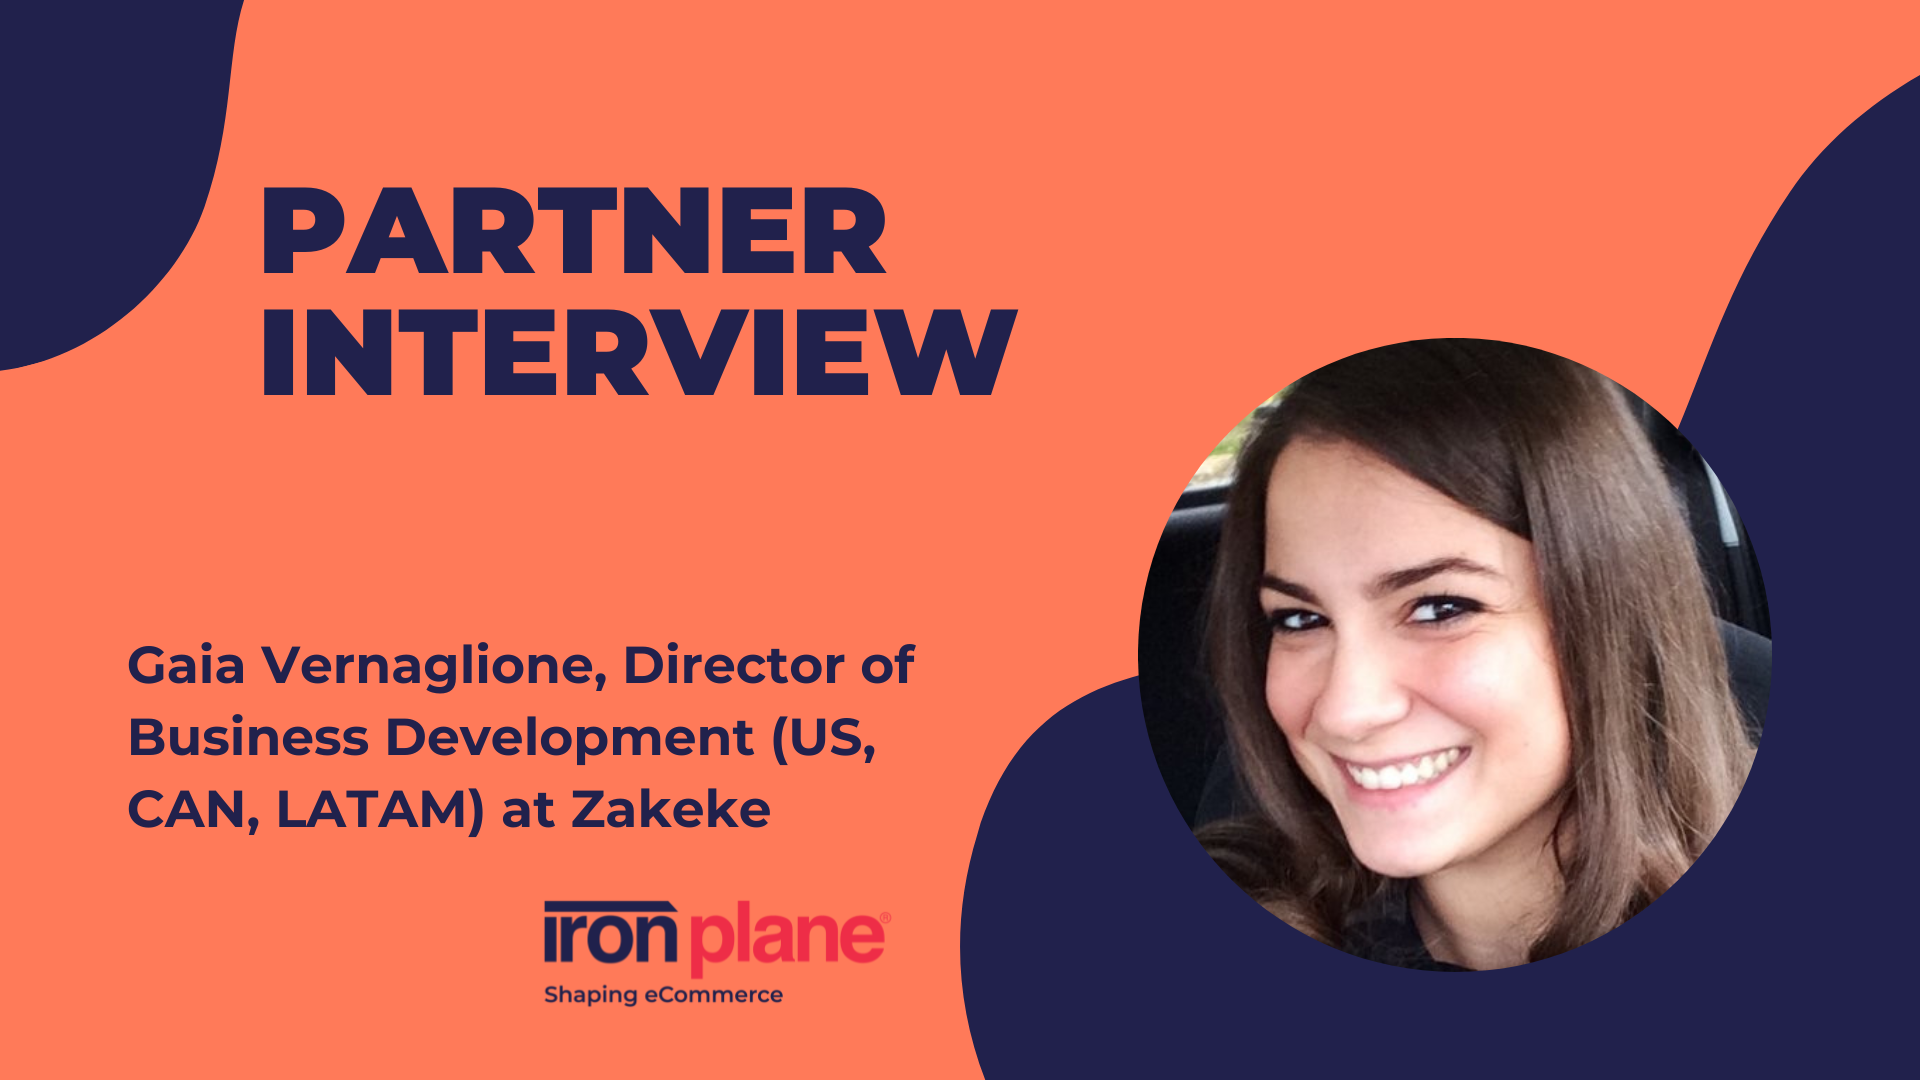 Shaping eCommerce with Gaia Vernaglione, Director of Business Development (US, CAN, LATAM) at Zakeke